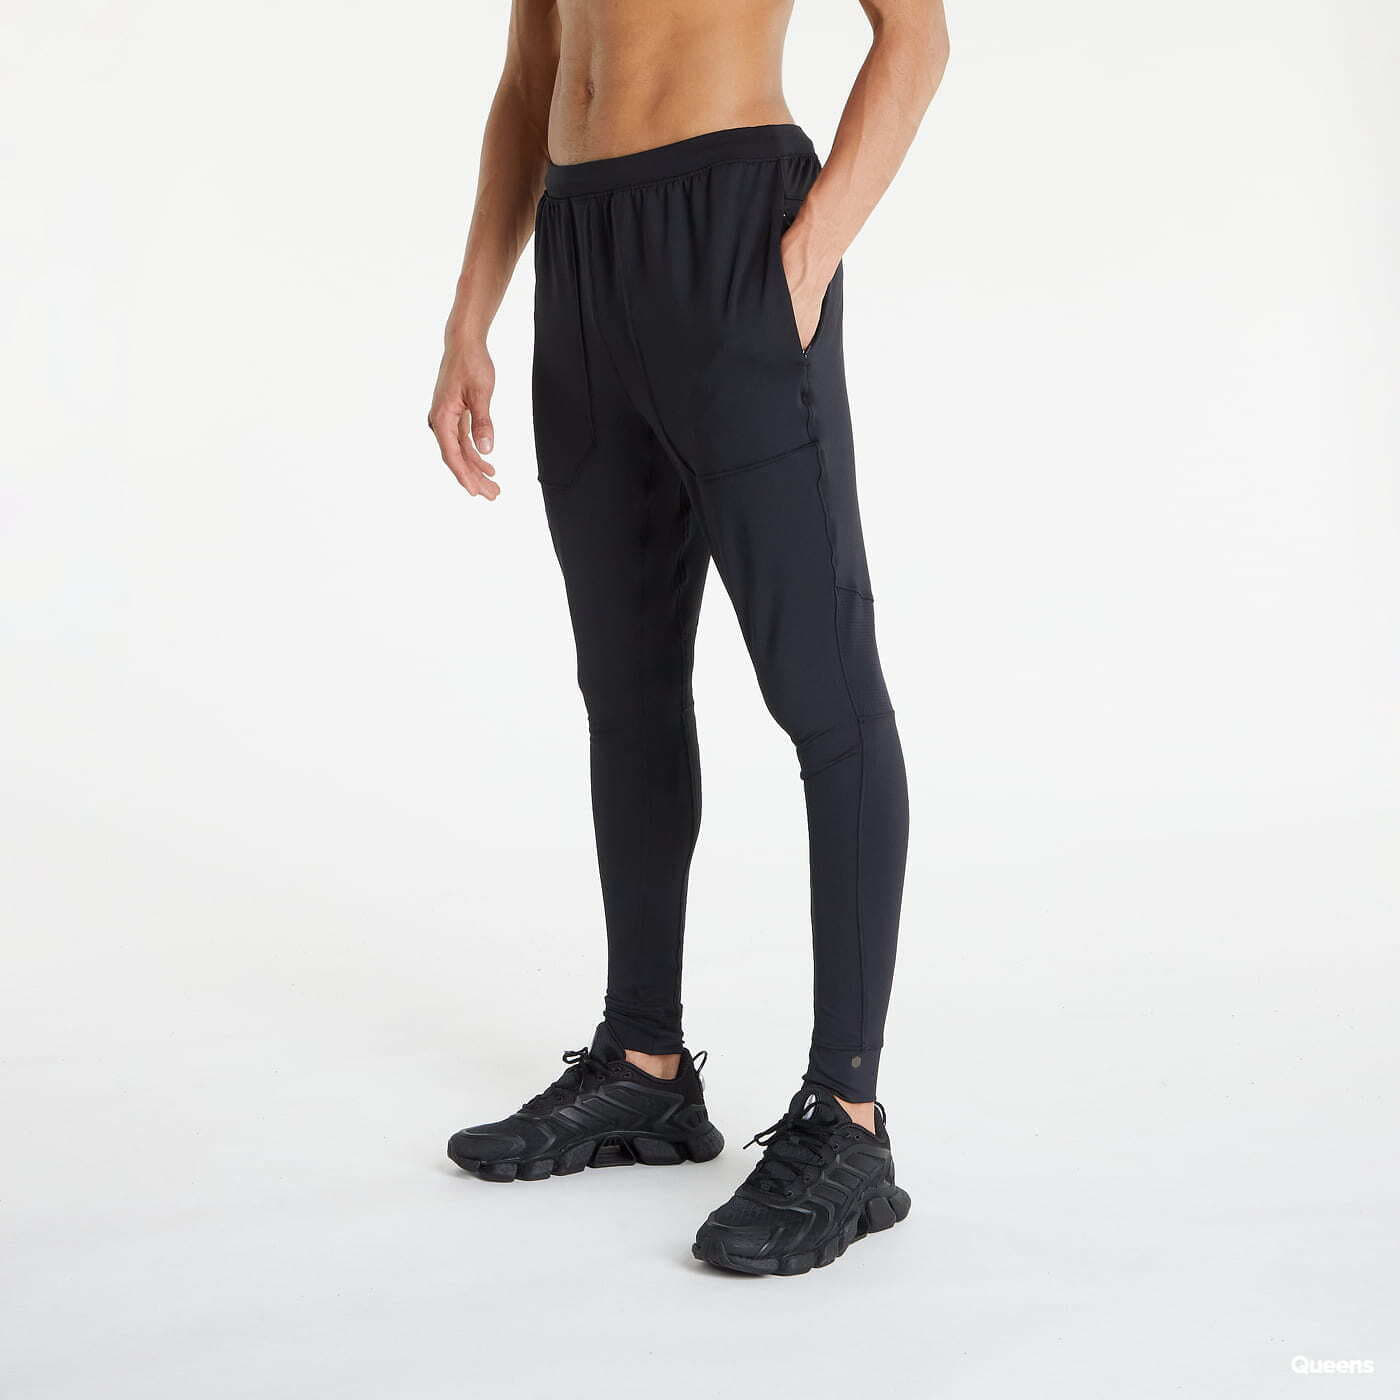 Under Armour Rush Fitted Pant Black 1328702-001 - Free Shipping at